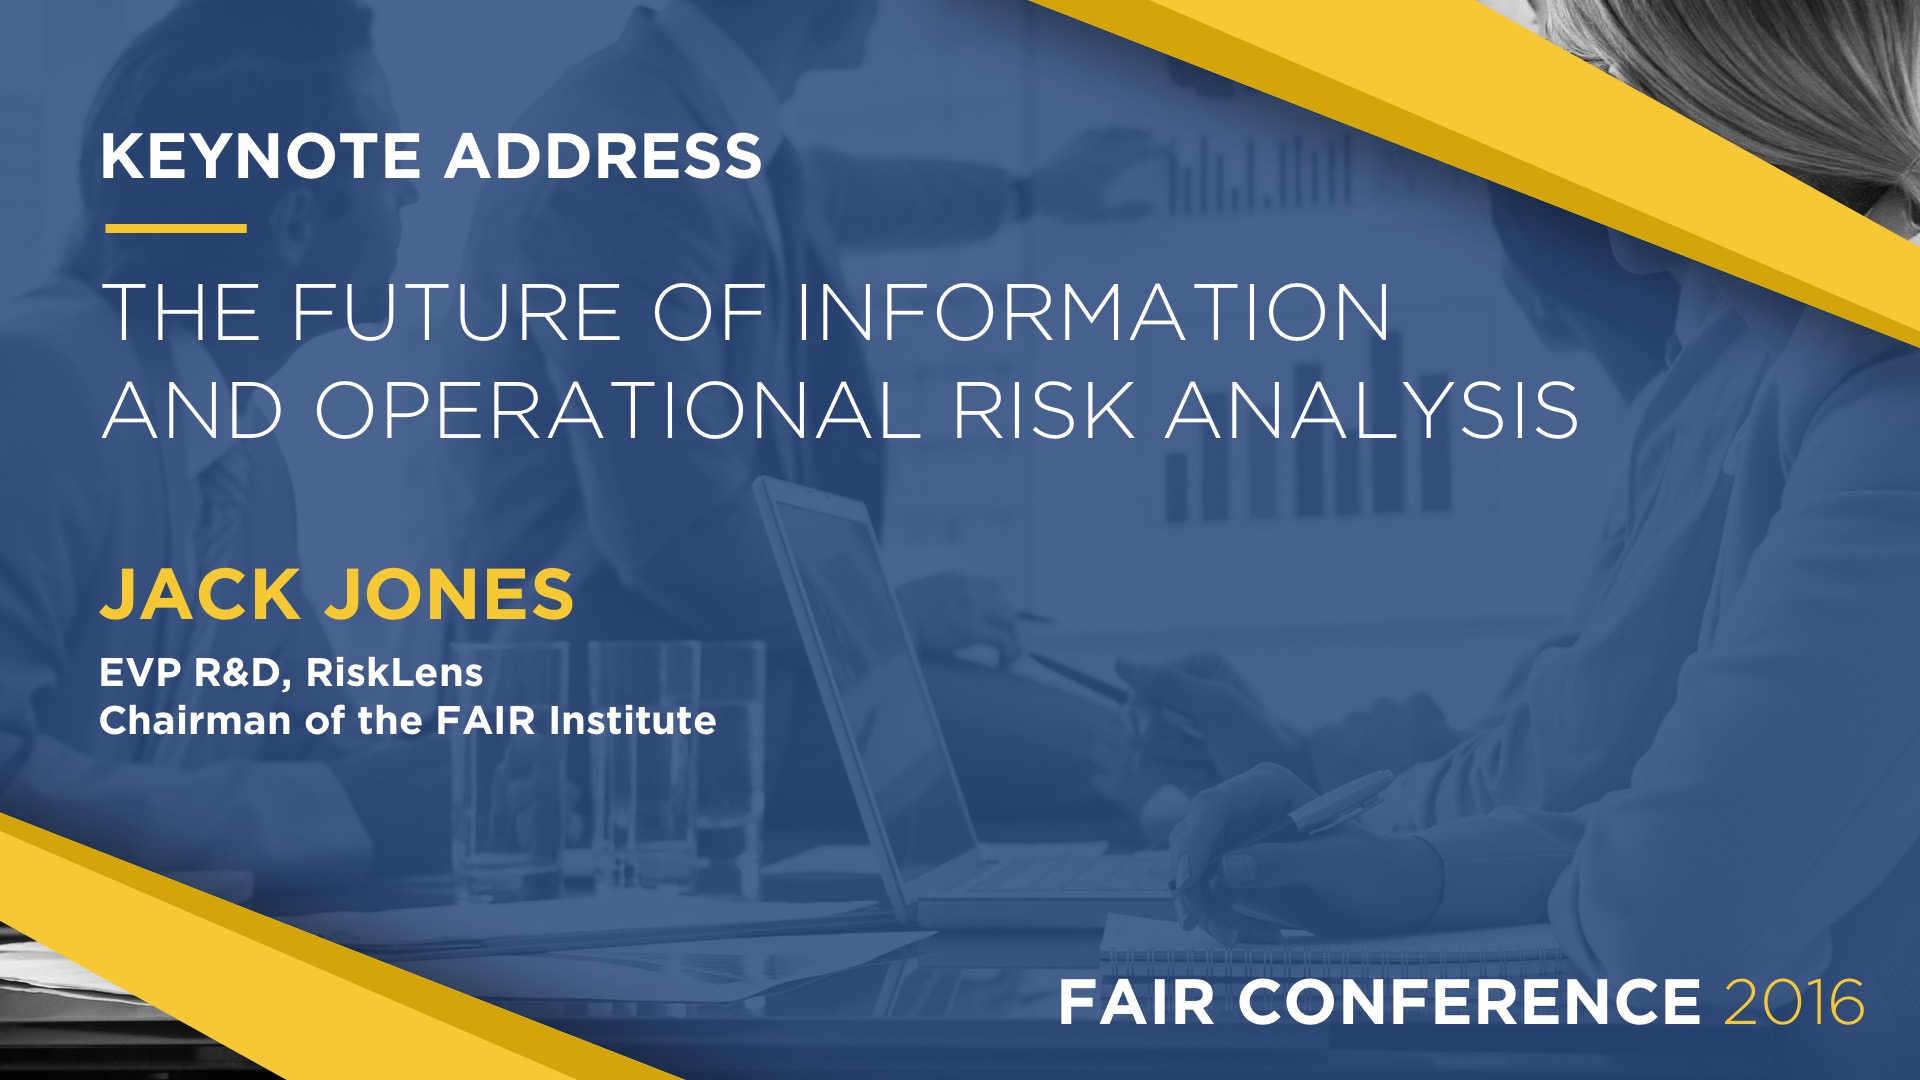 Video Now Available: The Future of Information and Operational Risk Analysis